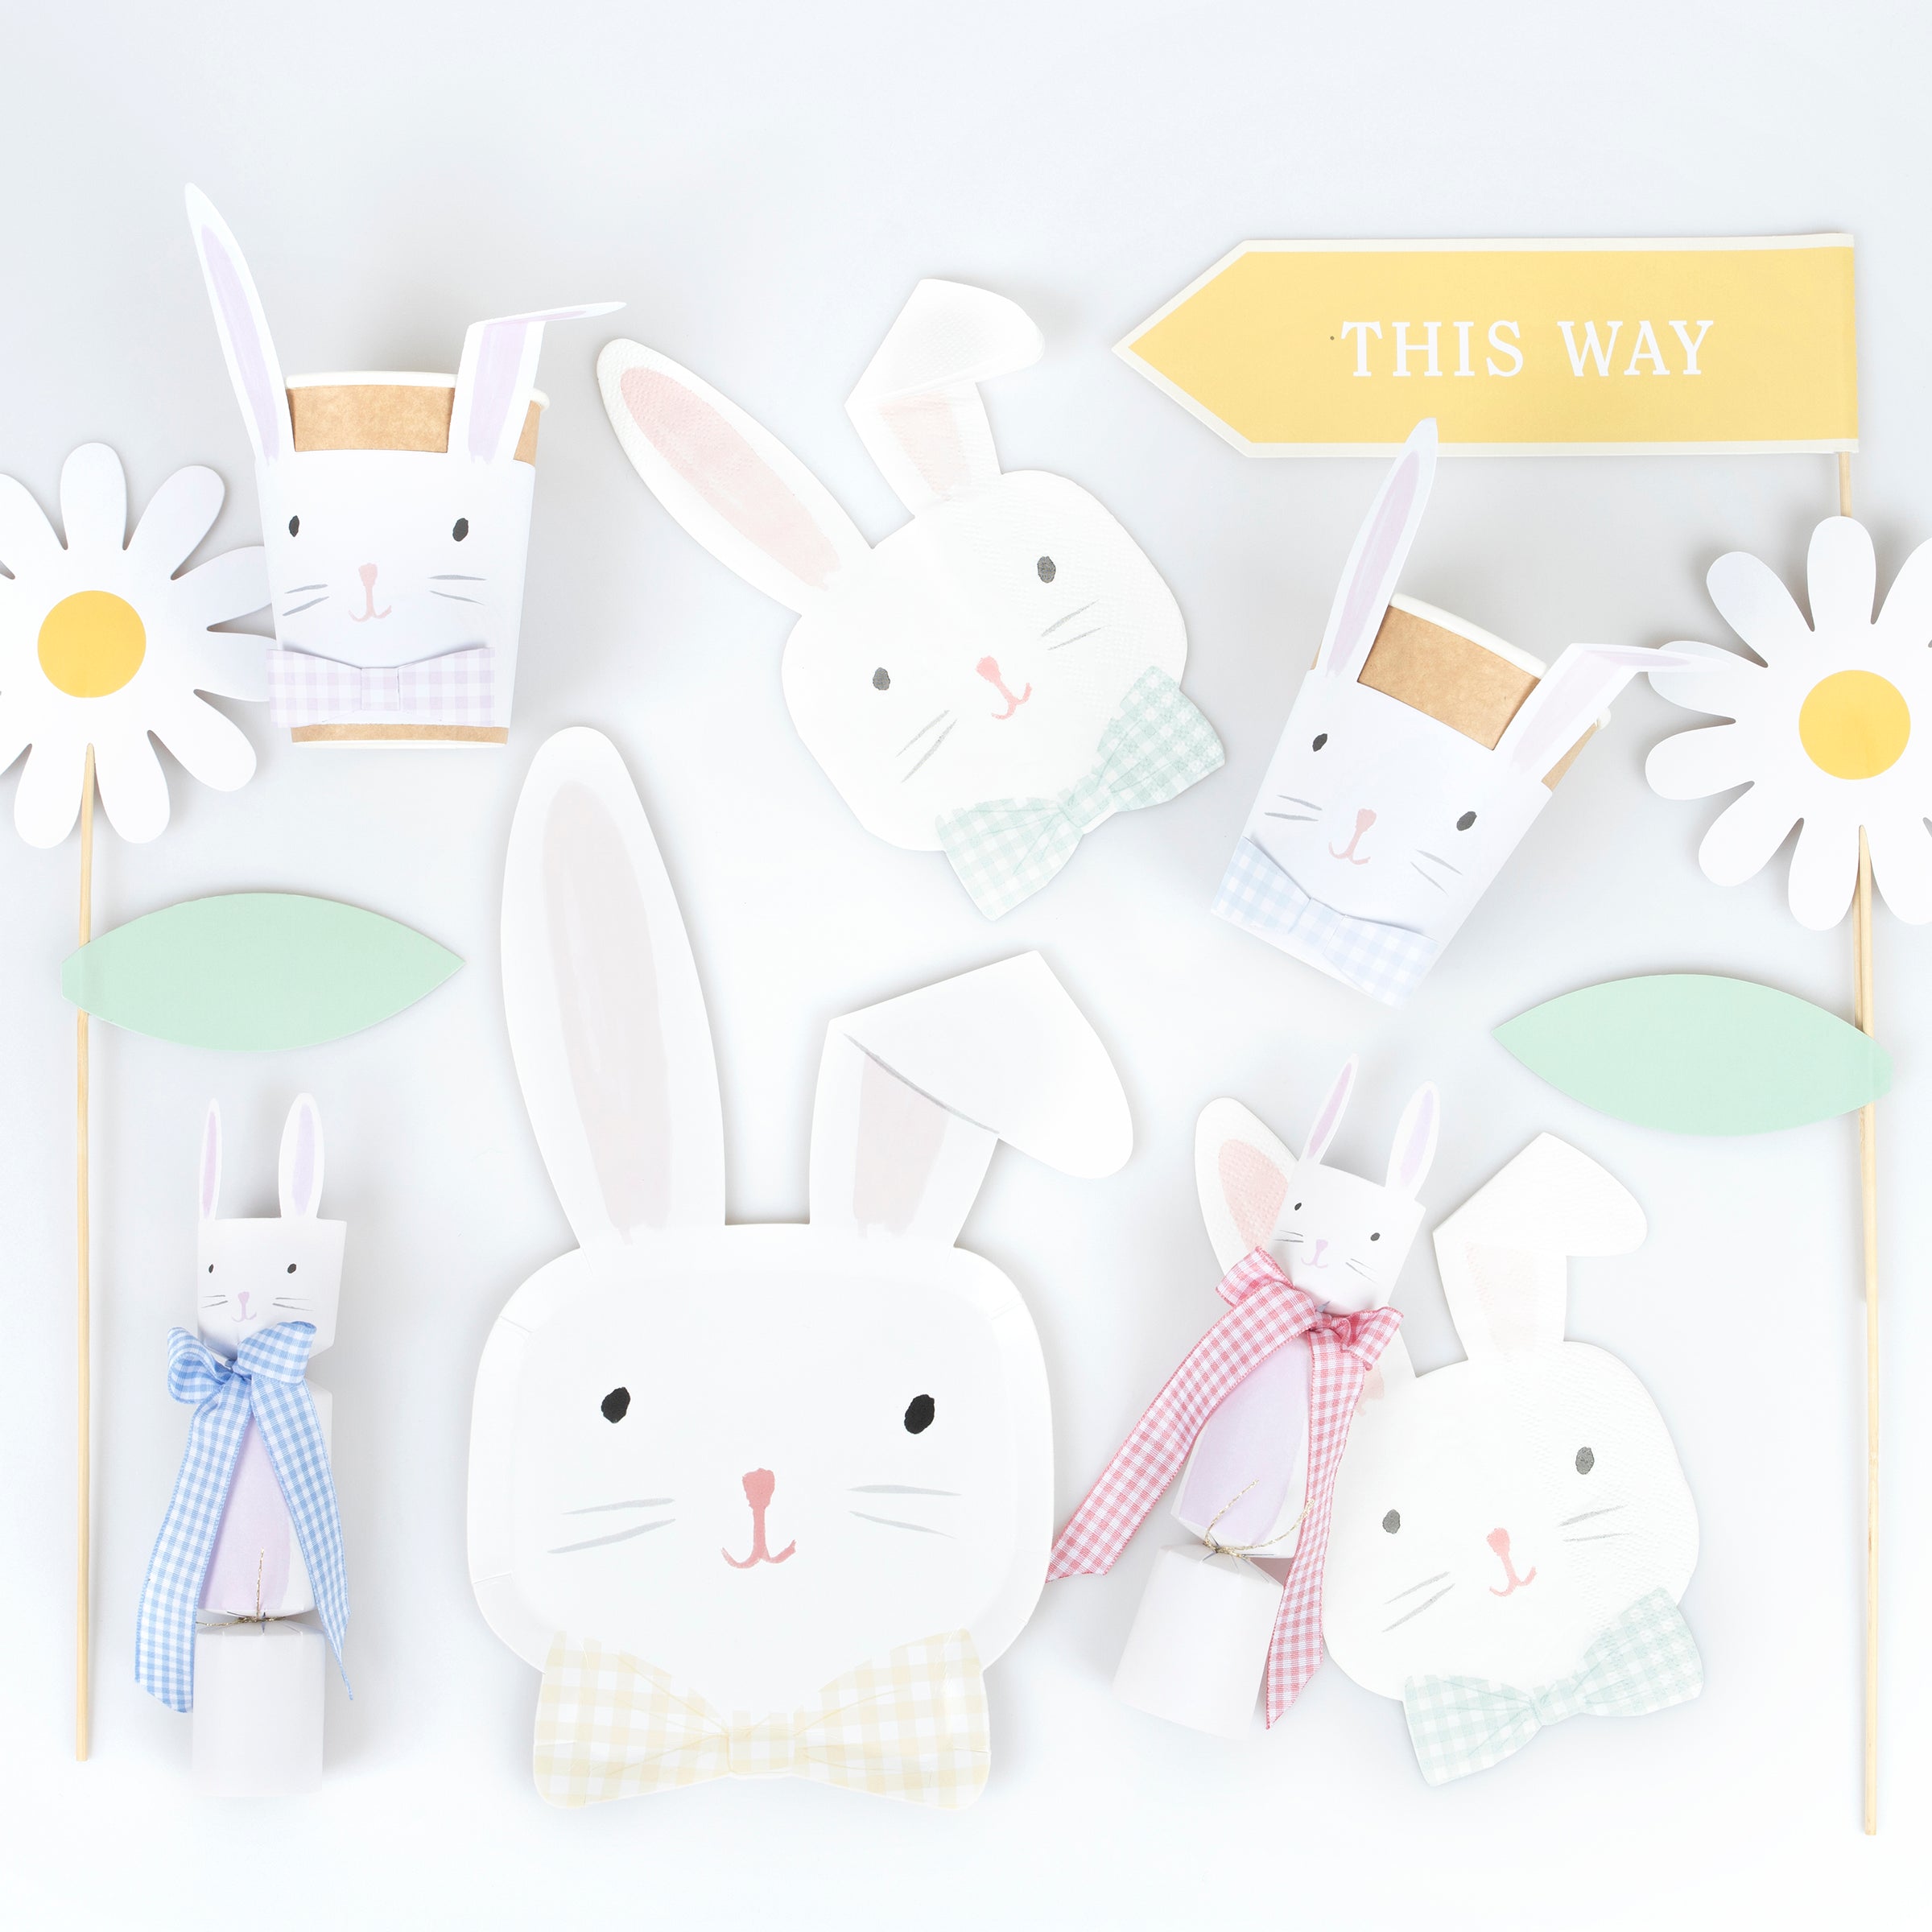 Our Easter party napkins, in the shape of the a bunny, feature on-trend gingham bows.